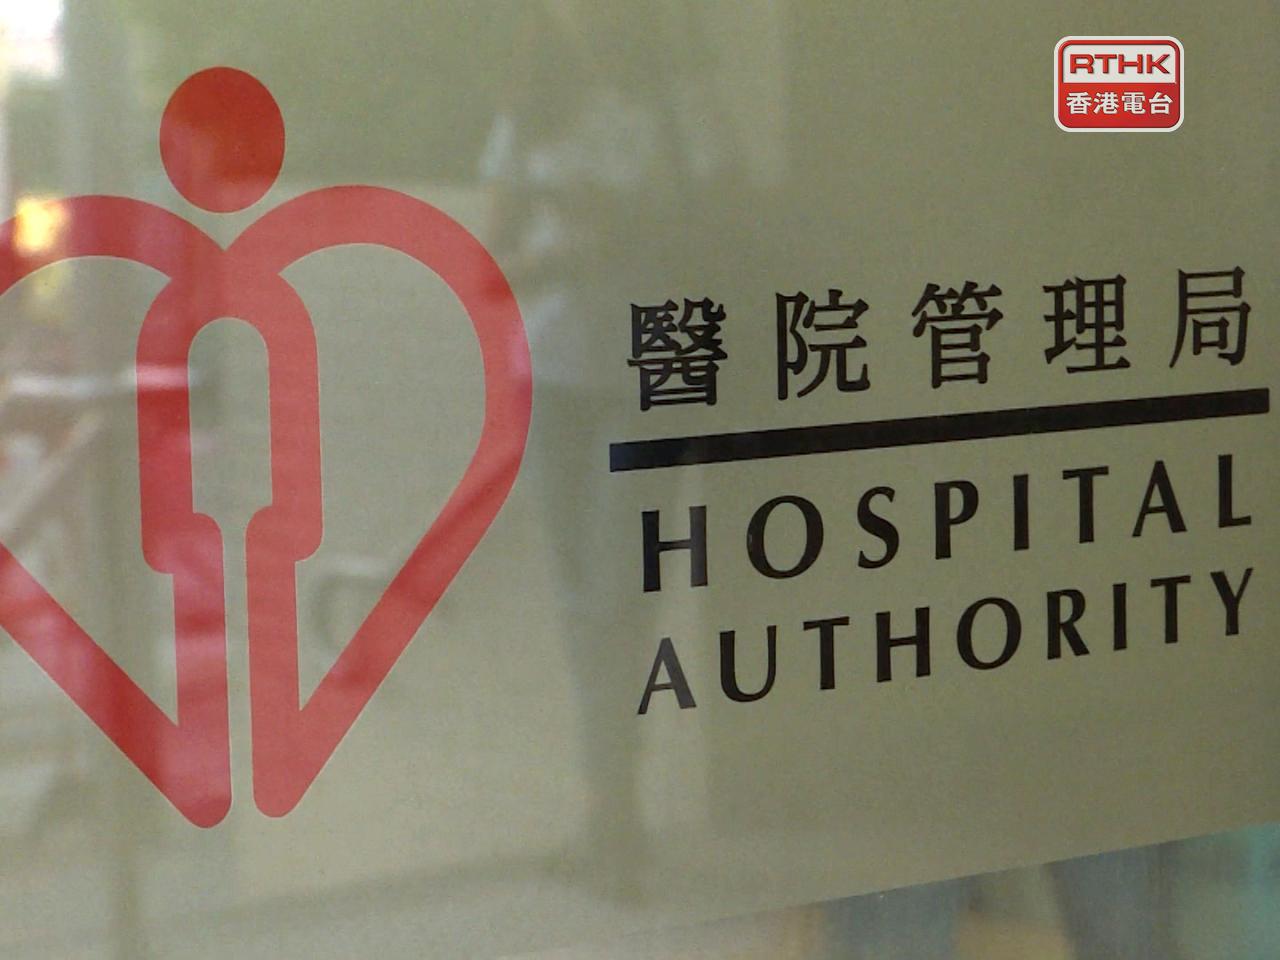 Hospital Authority appoints review committee members